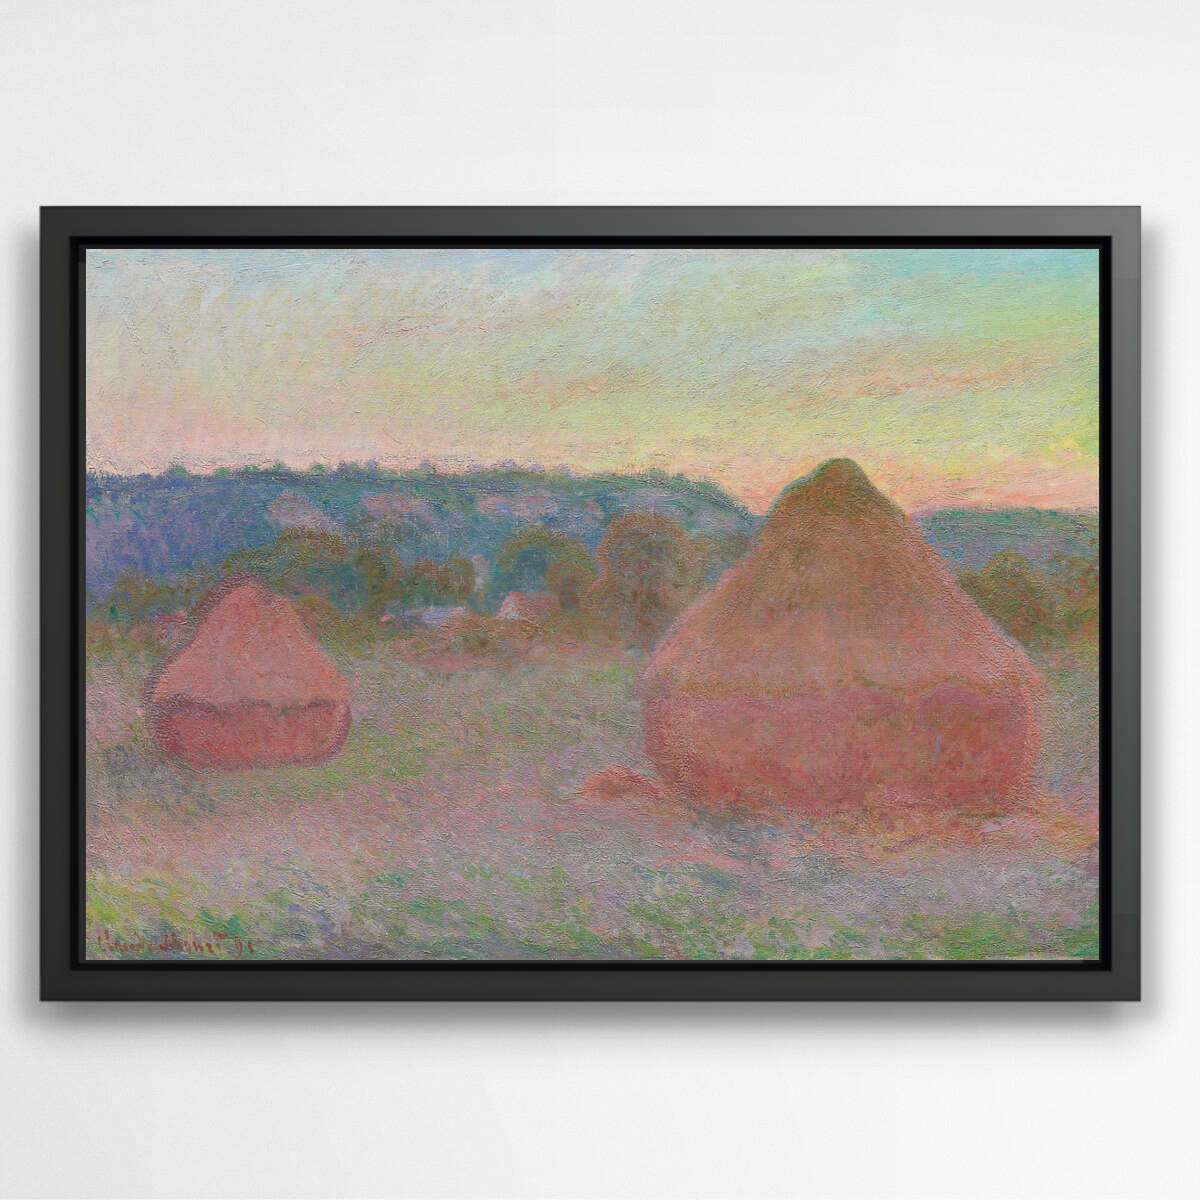 Haystacks End of Day Autumn by Claude Monet | Claude Monet Wall Art Prints - The Canvas Hive